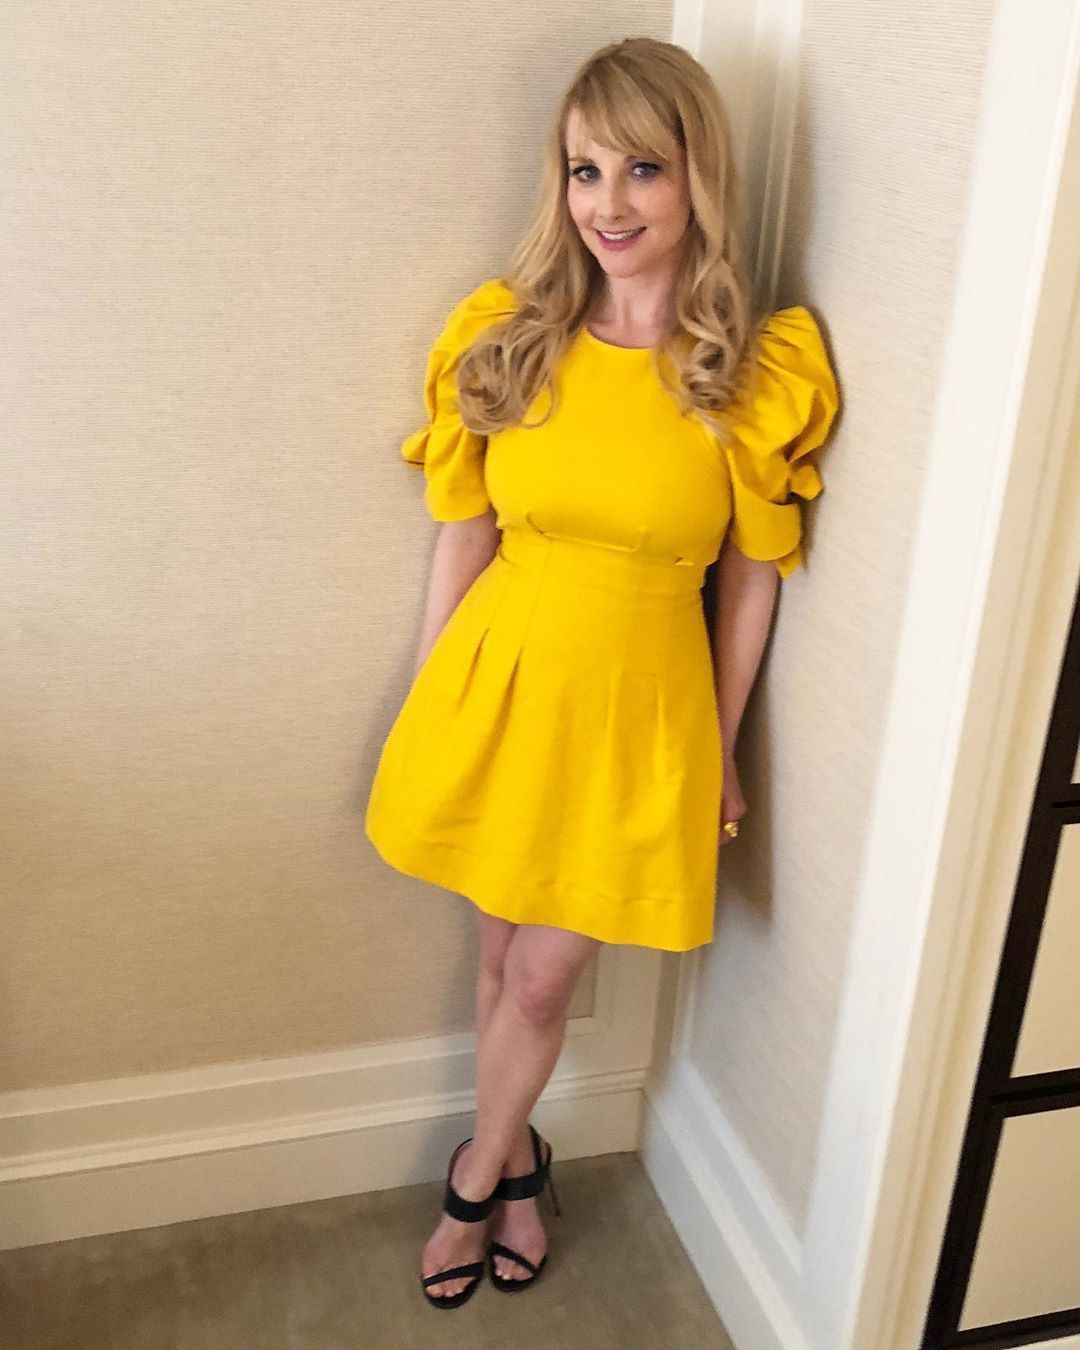 melissa rauch standing against wall wearing yellow dress